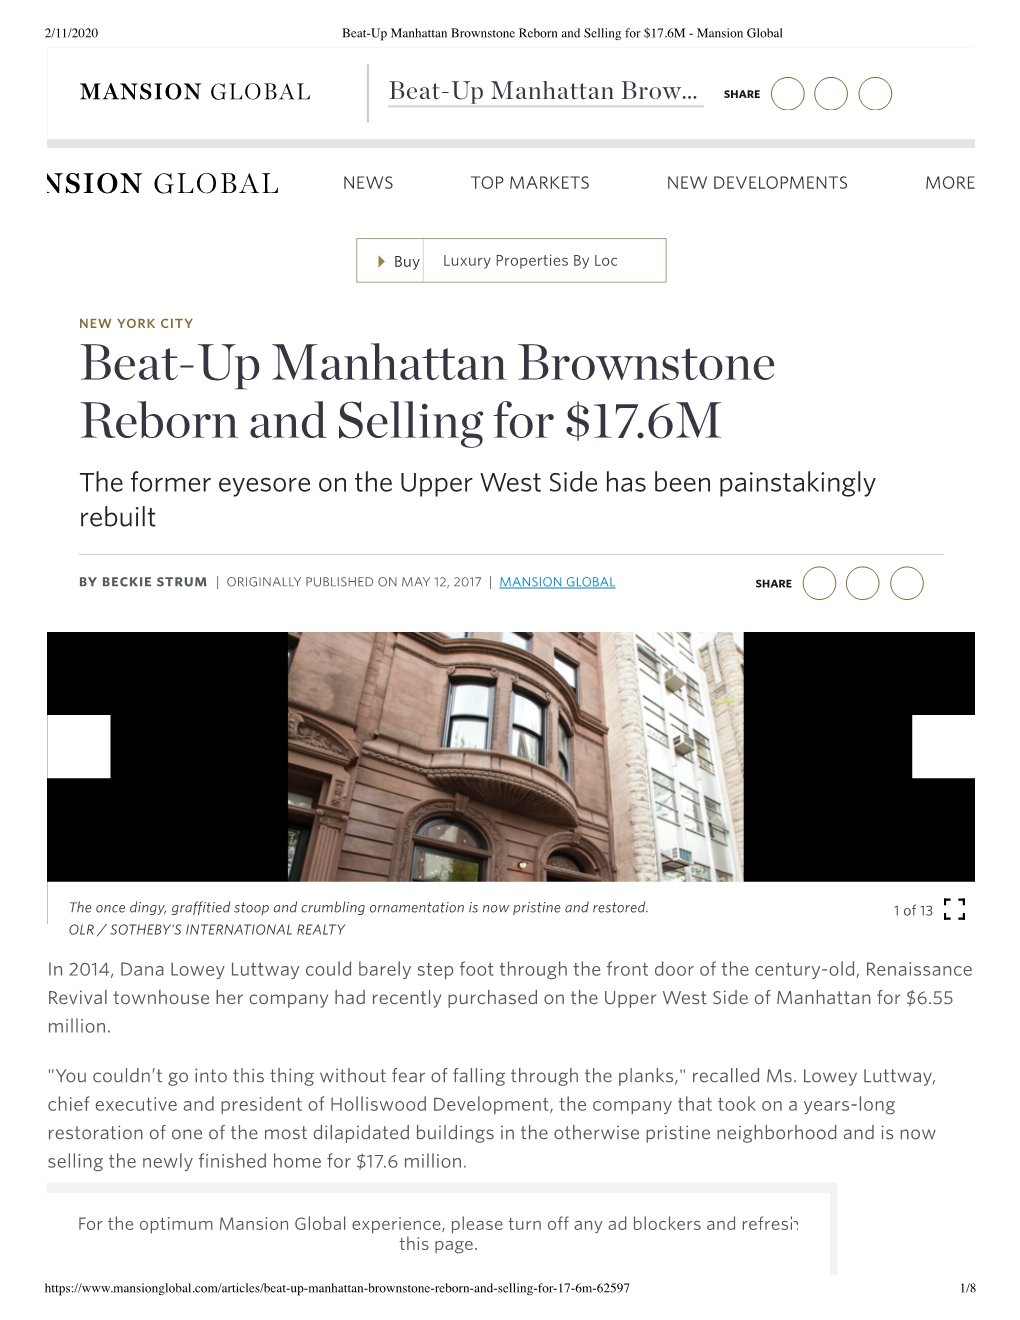 Beat-Up Manhattan Brownstone Reborn Andselling For$17.6M